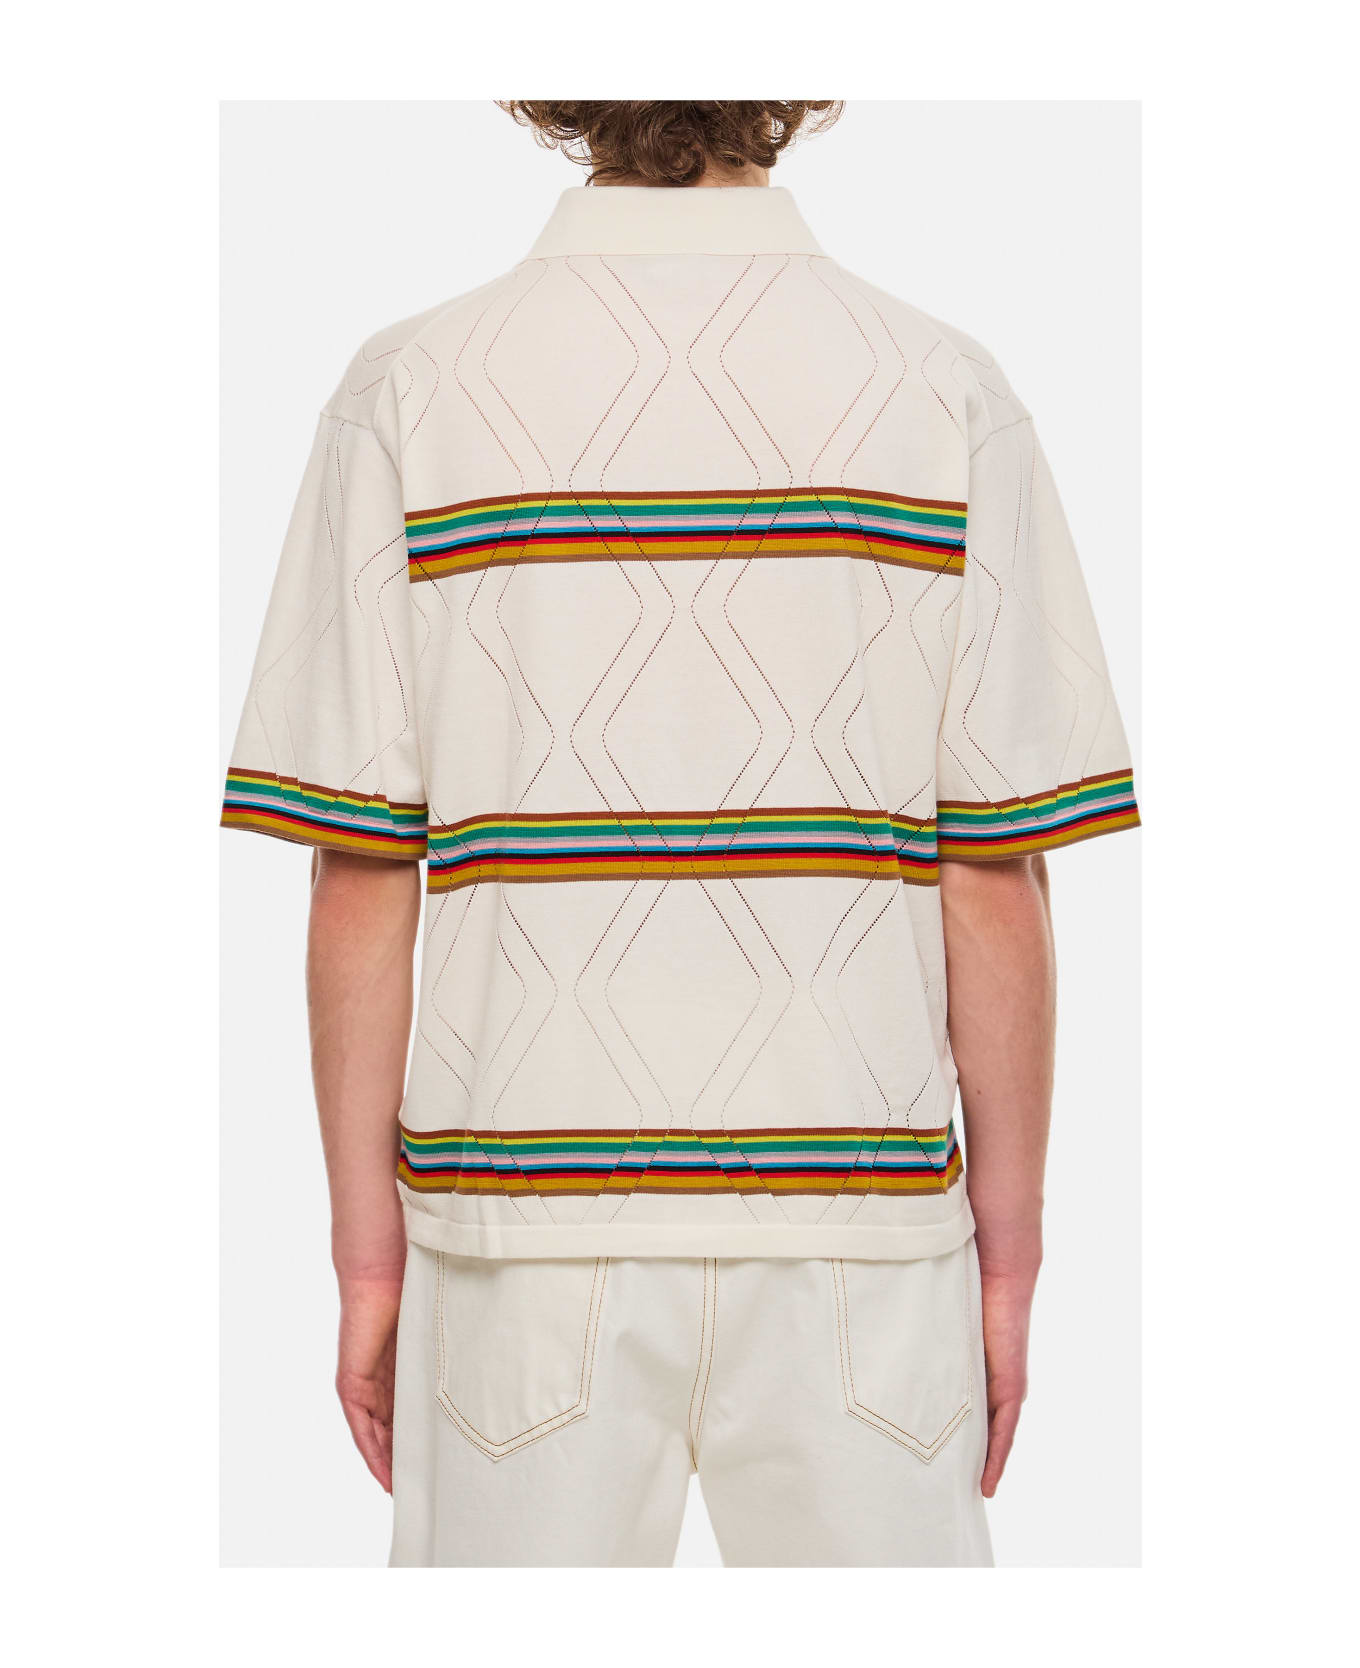 Paul Smith Knitted Ss Shirt - White